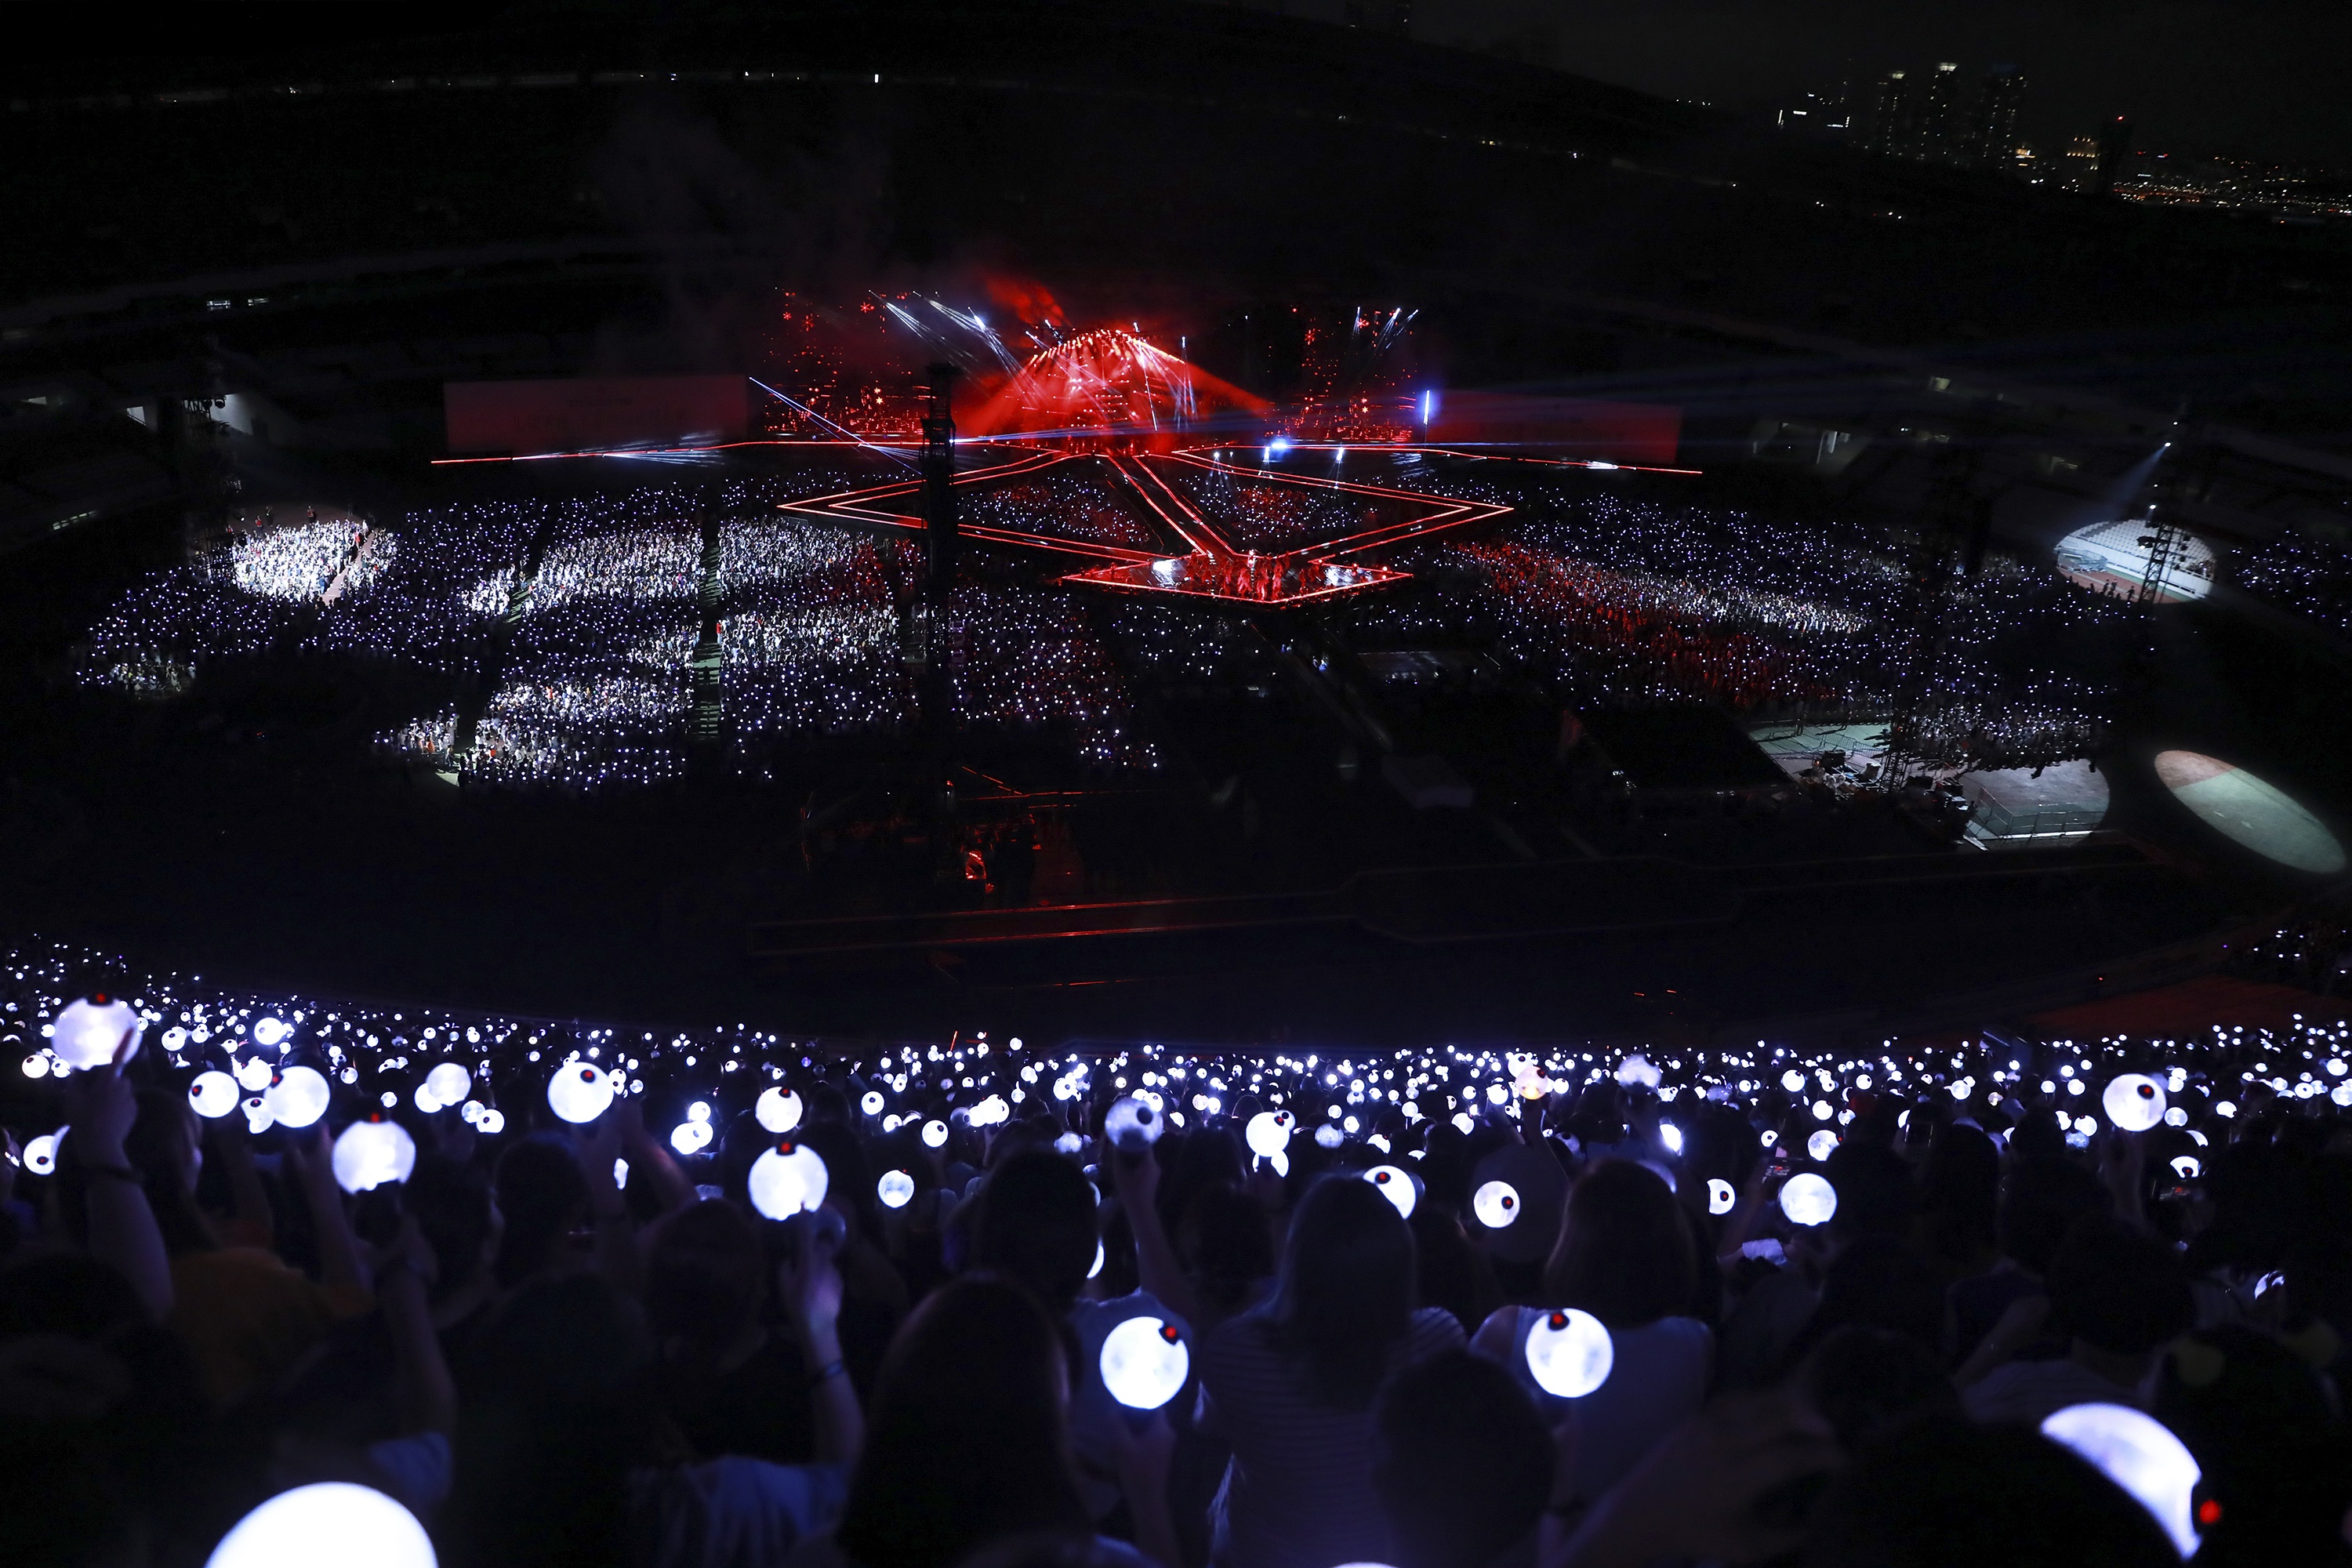 I think weve come to our own world, seeing you Ami (BTS fan club) who filled the vast venue. (RM)The concert of BTS was worth recalling in many ways: the first was to perform in the iconic venue of the Jamsil Olympic Main Stadium for the first time.As Suga said in the opening ceremony of Concert, it is a clear indication of their growth that they started at the 2,000-seat AX Hall and reached the main stadium of 45,000 seats.The main stadium was where only top singers such as Cho Yong-pil, Seo Tai-ji and H.O.T. BTS met 90,000 fans by performing here for two days.At the meeting, Suga said, I am proud to perform at the AT & T Stadium in the United States for the first time in Korea, and I do not feel real on the other hand. If I rehearse at AT & T Stadium, I will be ready as hard as we did before.We are the first to be solo concerts in Europe, and I am most curious about the reaction of the amigos who see the stage. We will prepare well with our unique energy. (B)It is an album that decorates YG Entertainments two and a half years of work, but I put down various burdens and prepared it with the desire to enjoy it with my fans.The festival is a long preparation period, but it seems like you have to enjoy it in a moment and then you have to leave garbage and clean it up.The good moments are momentary, and there are memories that remain like snapshots: Love Your Self thought it was festival after all, I wanted to say we should enjoy this short moment together.(RM)Its an album that captures the essence of the message that loving yourself is the beginning of love: this package album is literally festival.I worked with the idea that I wanted to enjoy rather than dwell on the record, so I think the title song Idol came out to fit the festival atmosphere. (Suga)BTS has set the concert opening stage with a new song, Idol (IDOL), which has been a thrilling festival since its inception.This song, which encourages the harmony of free movement and sword dance, is impressively added to the Korean element as it is called Chosun edition EDM.Also, Africa, Euro - Asian cultural elements are mixed. Idol is a song with a message that I am myself and I love myself even if someone else says something.In the Africa rhythm, Korean traditional music such as Earsu, Jihwaja, and Kungdererer were put into the rhythm, and EDM was combined with it, resulting in Korean and global music.I cant tell you about performance, but Africa dance is mixed with Korean dance; Samulnori and mask dance are combined to make it easy to follow. (Jay Hop)On this day, the stage of the new songs on the new album and the individual stage of the members were the points of observation.The choreography of the bü, which seemed to rise up from the collapse of the members The Crow: Salvation on the stage of the new song Im Fine (Impine), conveyed the songs message touchingly.At the meeting, RM explained the song and said, If you look at the lyrics, you say it is not okay, but it is okay. It is a song that says that the misfortune of life will be repeated, but it is okay. It was a time to deeply see the charm of the members on the solo stage.Jay Hop, who first appeared in a white suit, featured all three songs, rap and dance with Trivia (gi): Just Dance.Jungkook then sang Euphoria and gave a live live performance to passionate dance.Jimin sang Serendipity as a solo song, creating a dreamy atmosphere and revealing Jimins charm without filtering.RM showed intense rappang with Trivia (win): Love, while Vue showed Singularity with an overwhelming facial expression.Suga overturned the expectation of raping and played the song heavily through Trivia (formerly): Seesaw, and Jean mournfully sang Epiphany with piano playing.They showed various set lists such as Magic Shop, I Need You, Airplane Pt.2, I can not tell, DNA, Fake Love and MIC Drop.I told people to do Love Your Self for two and a half years, but I could not do it.I think I have a lot of thoughts to myself about what I am doing so hard for, I have a lot of insults to myself and a lot of strange thoughts.I just thought, Im being so hard on me. In the future, I thought I should trust me more and trust my members and think good things. (Jimin)If this concert is the last meaning, it can be said that BTS growth.Suga said, We started from a young child, he said. What we pursued was about the growth of humans and people.It was a world view that YG Entertainment had been before its debut and it is expanding. I have been doing a lot of tours and my teamwork has improved a lot, said Bue. I was impressed by the fact that Suga and RM were trying to support me as safely as possible until I was on the floor while I was preparing Im fine.At the meeting, they also answered questions about the next album plan and renewal with their agency.Suga said, We have to start a new YG Entertainment from now on. We all think that the topic we think is the subject of the next series.Asked about the contract with his agency Big Hit, Jin said, I have a lot of talk with the members and I continue to talk with the company, but I will probably be able to tell you good news soon.Another question was asked about the analysis that the global popularity factor of BTS is SNS.Suga said, I think it is definitely wrong. I am focused on music, performance and messages that BTS thinks are important, so many people love it and I think it is a seed.Youll have looked up SNS after that, replied RM, who also said: All members love music and performance, element and consistency are our secret to popularity.Today, the precipitation rate was over 80%, but it didnt rain at all during the performance. It seems like heaven is helping.Im going to show you, Ami, to play guitar, play the piano... and thank you for your various experiences. (Jin)I tried a lot to eat red ginseng, propolis, sleep hard, and show you the stage in the best condition.It wasnt a satisfying performance for me, I thought I could do better, but I didnt think I could grow more.I will show you that I have grown up in the next Concert by doing twice as hard as I am now. (Jungkook)When did BTS come to this place? , You came to a really high place. Its so good to be able to show our songs and performances here and this moment is so happy, you see, you also love your self!(Jay Hop)BTS World Tour, Seoul Concert